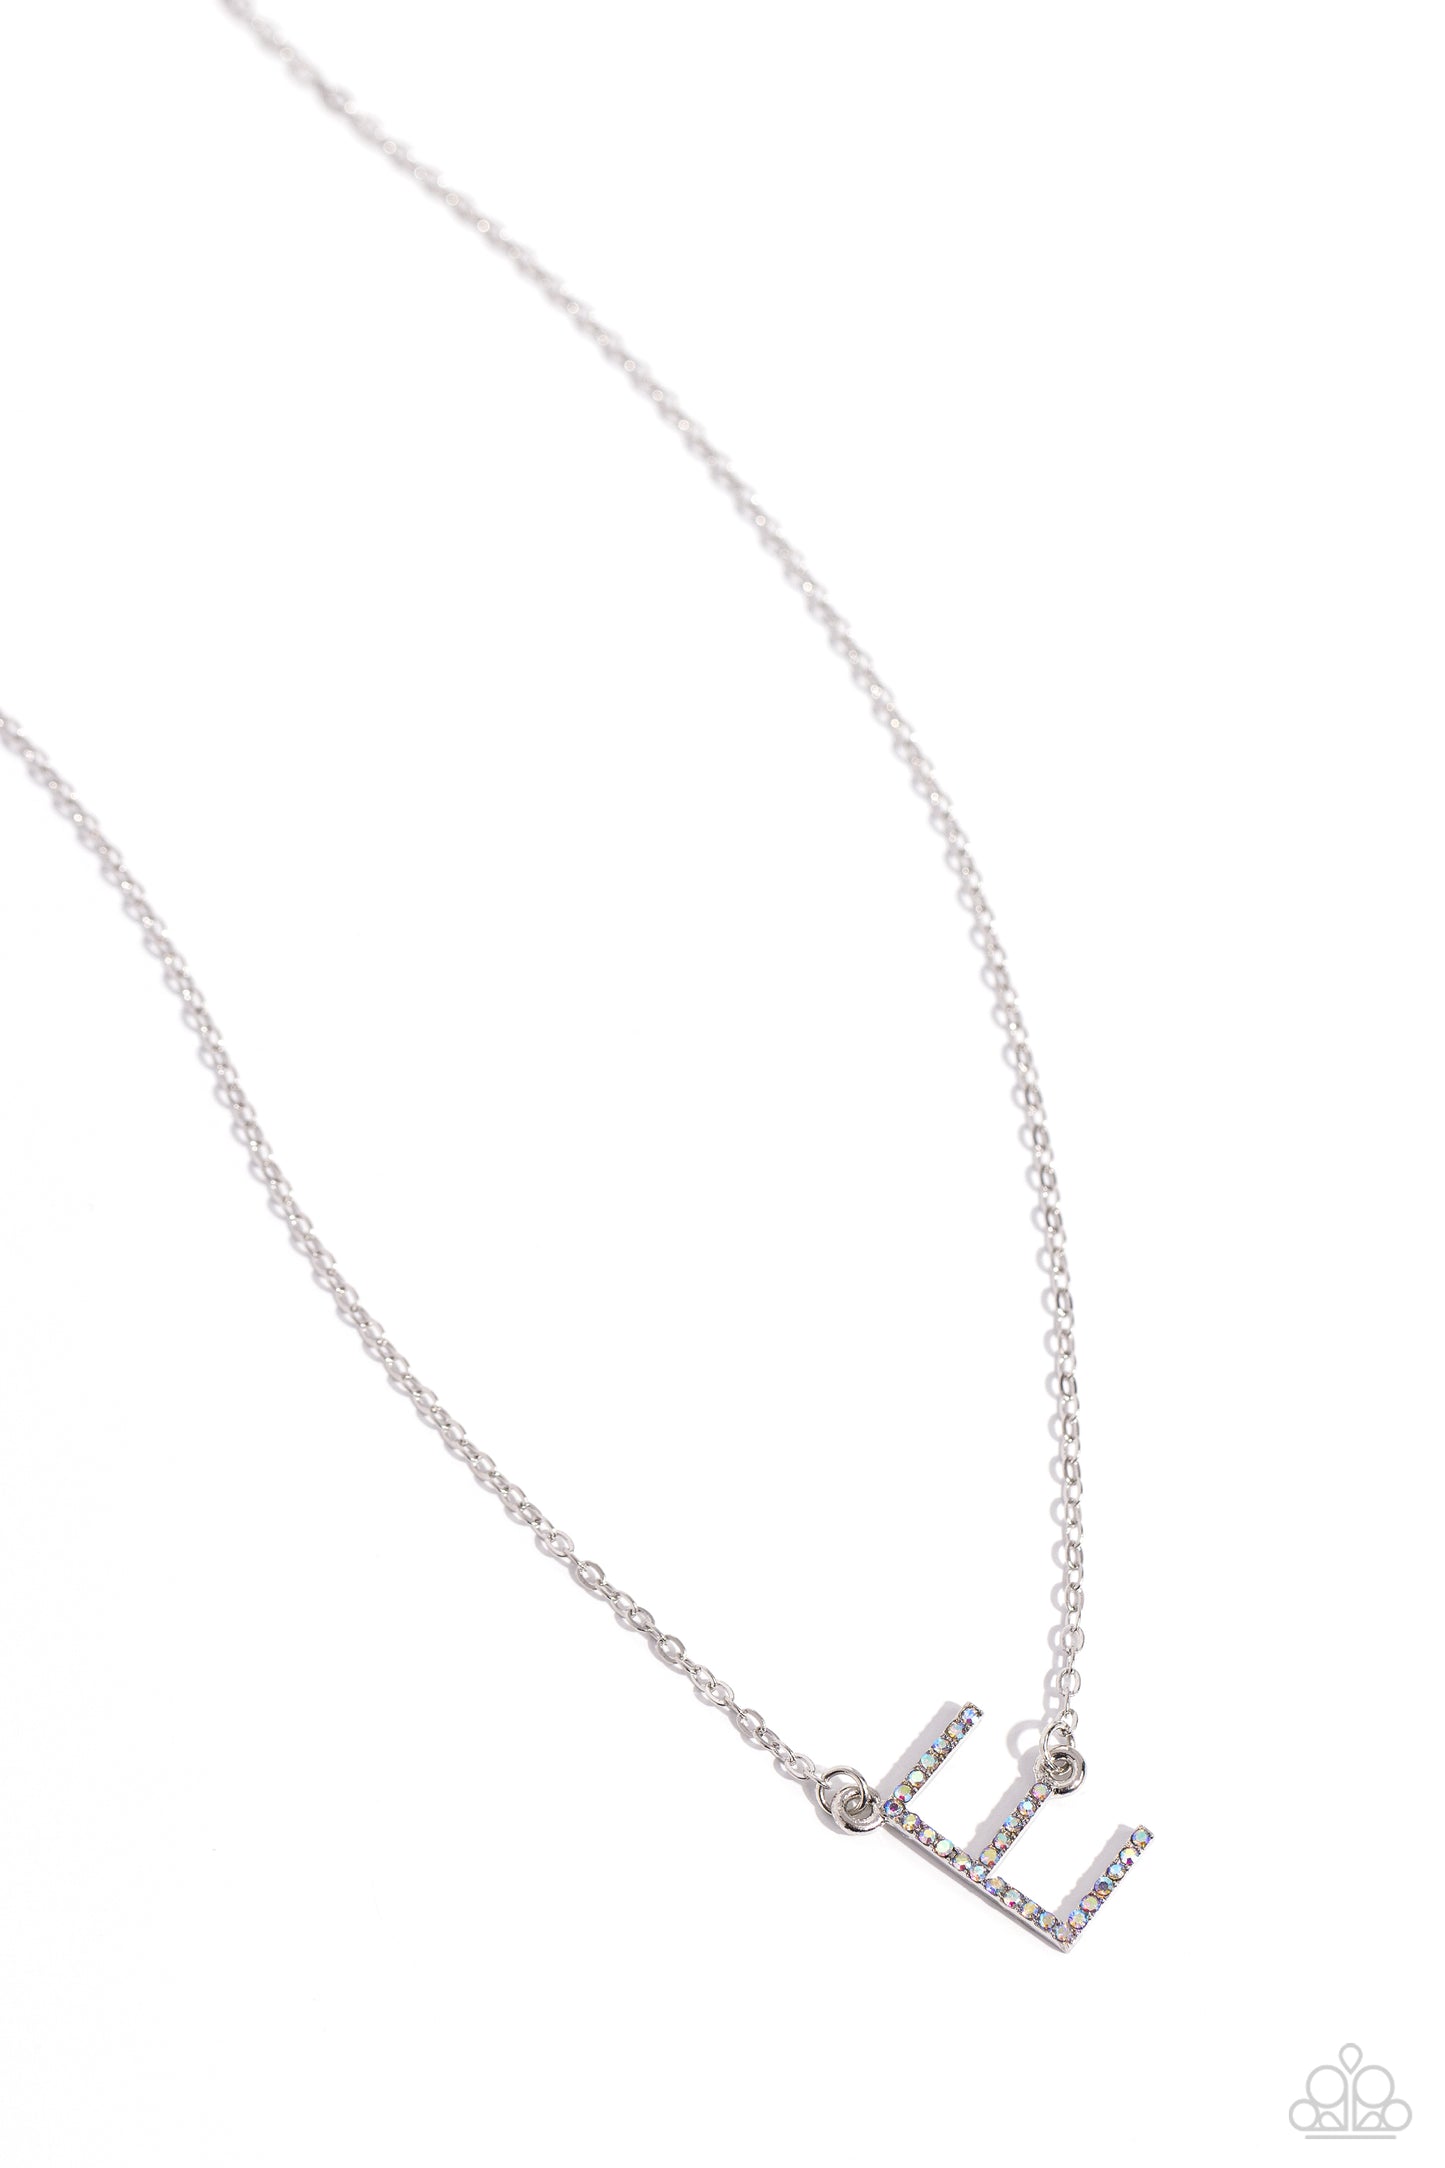 INITIALLY Yours Multi "E" Necklace - Paparazzi Accessories  Embossed with dainty iridescent rhinestones, a silver letter "E" hovers below the collar from a dainty silver chain, for a sentimentally simple design. Features an adjustable clasp closure. Due to its prismatic palette, color may vary.  Sold as one individual necklace. Includes one pair of matching earrings.  P2DA-MTXX-128XX